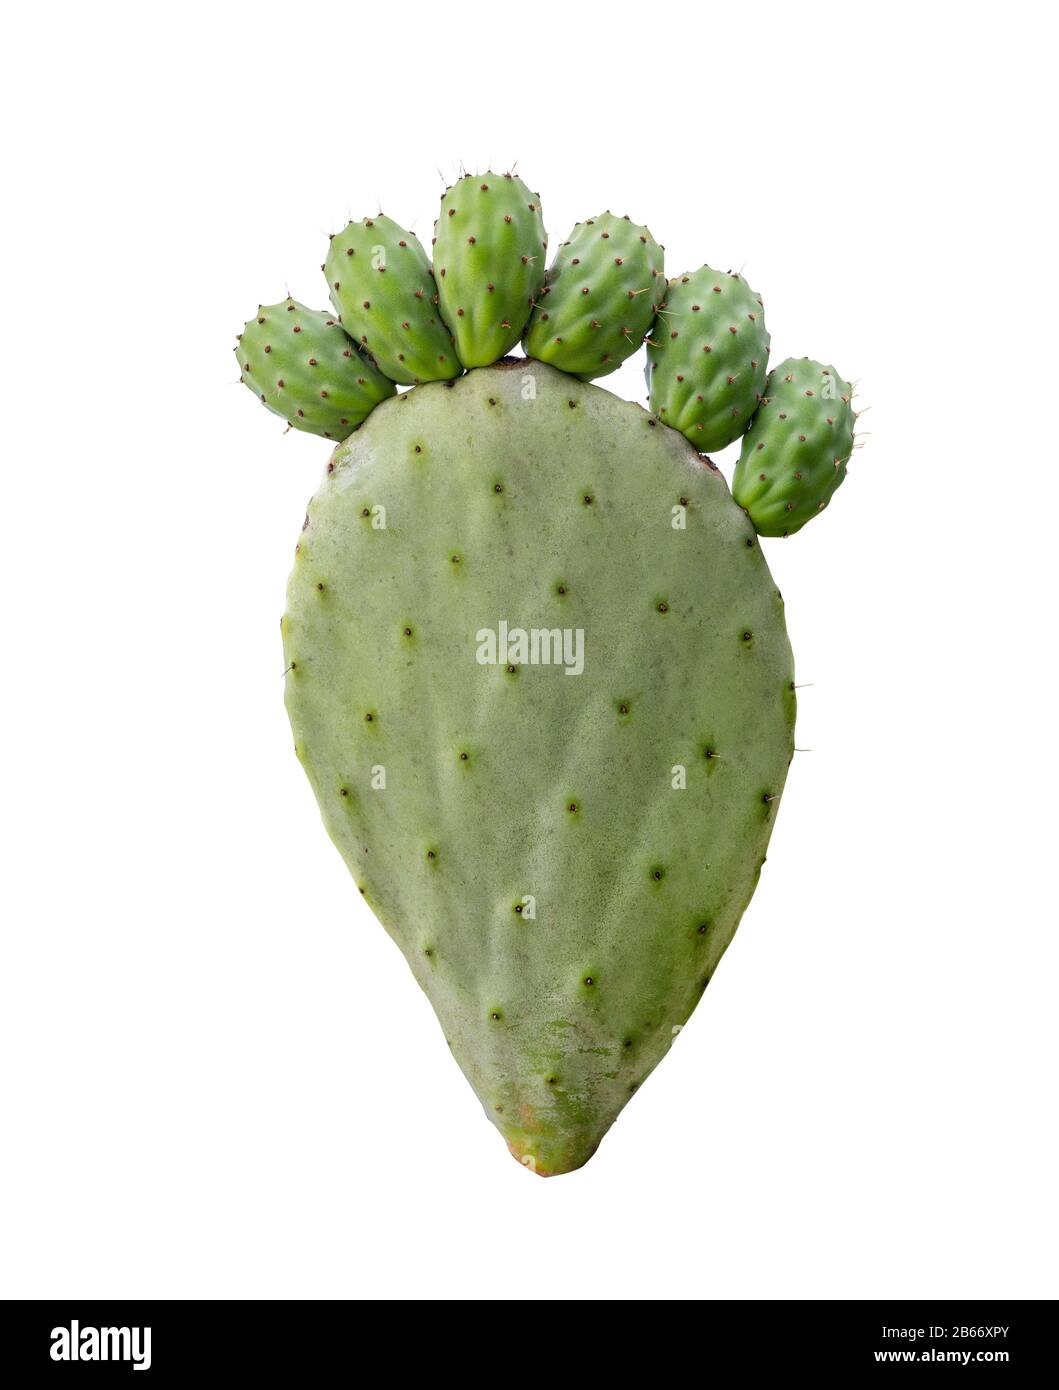 Pickly pear green opuntia cactus paw with fingers isolted on white background. Barbed painful feet disease concept Stock Photo